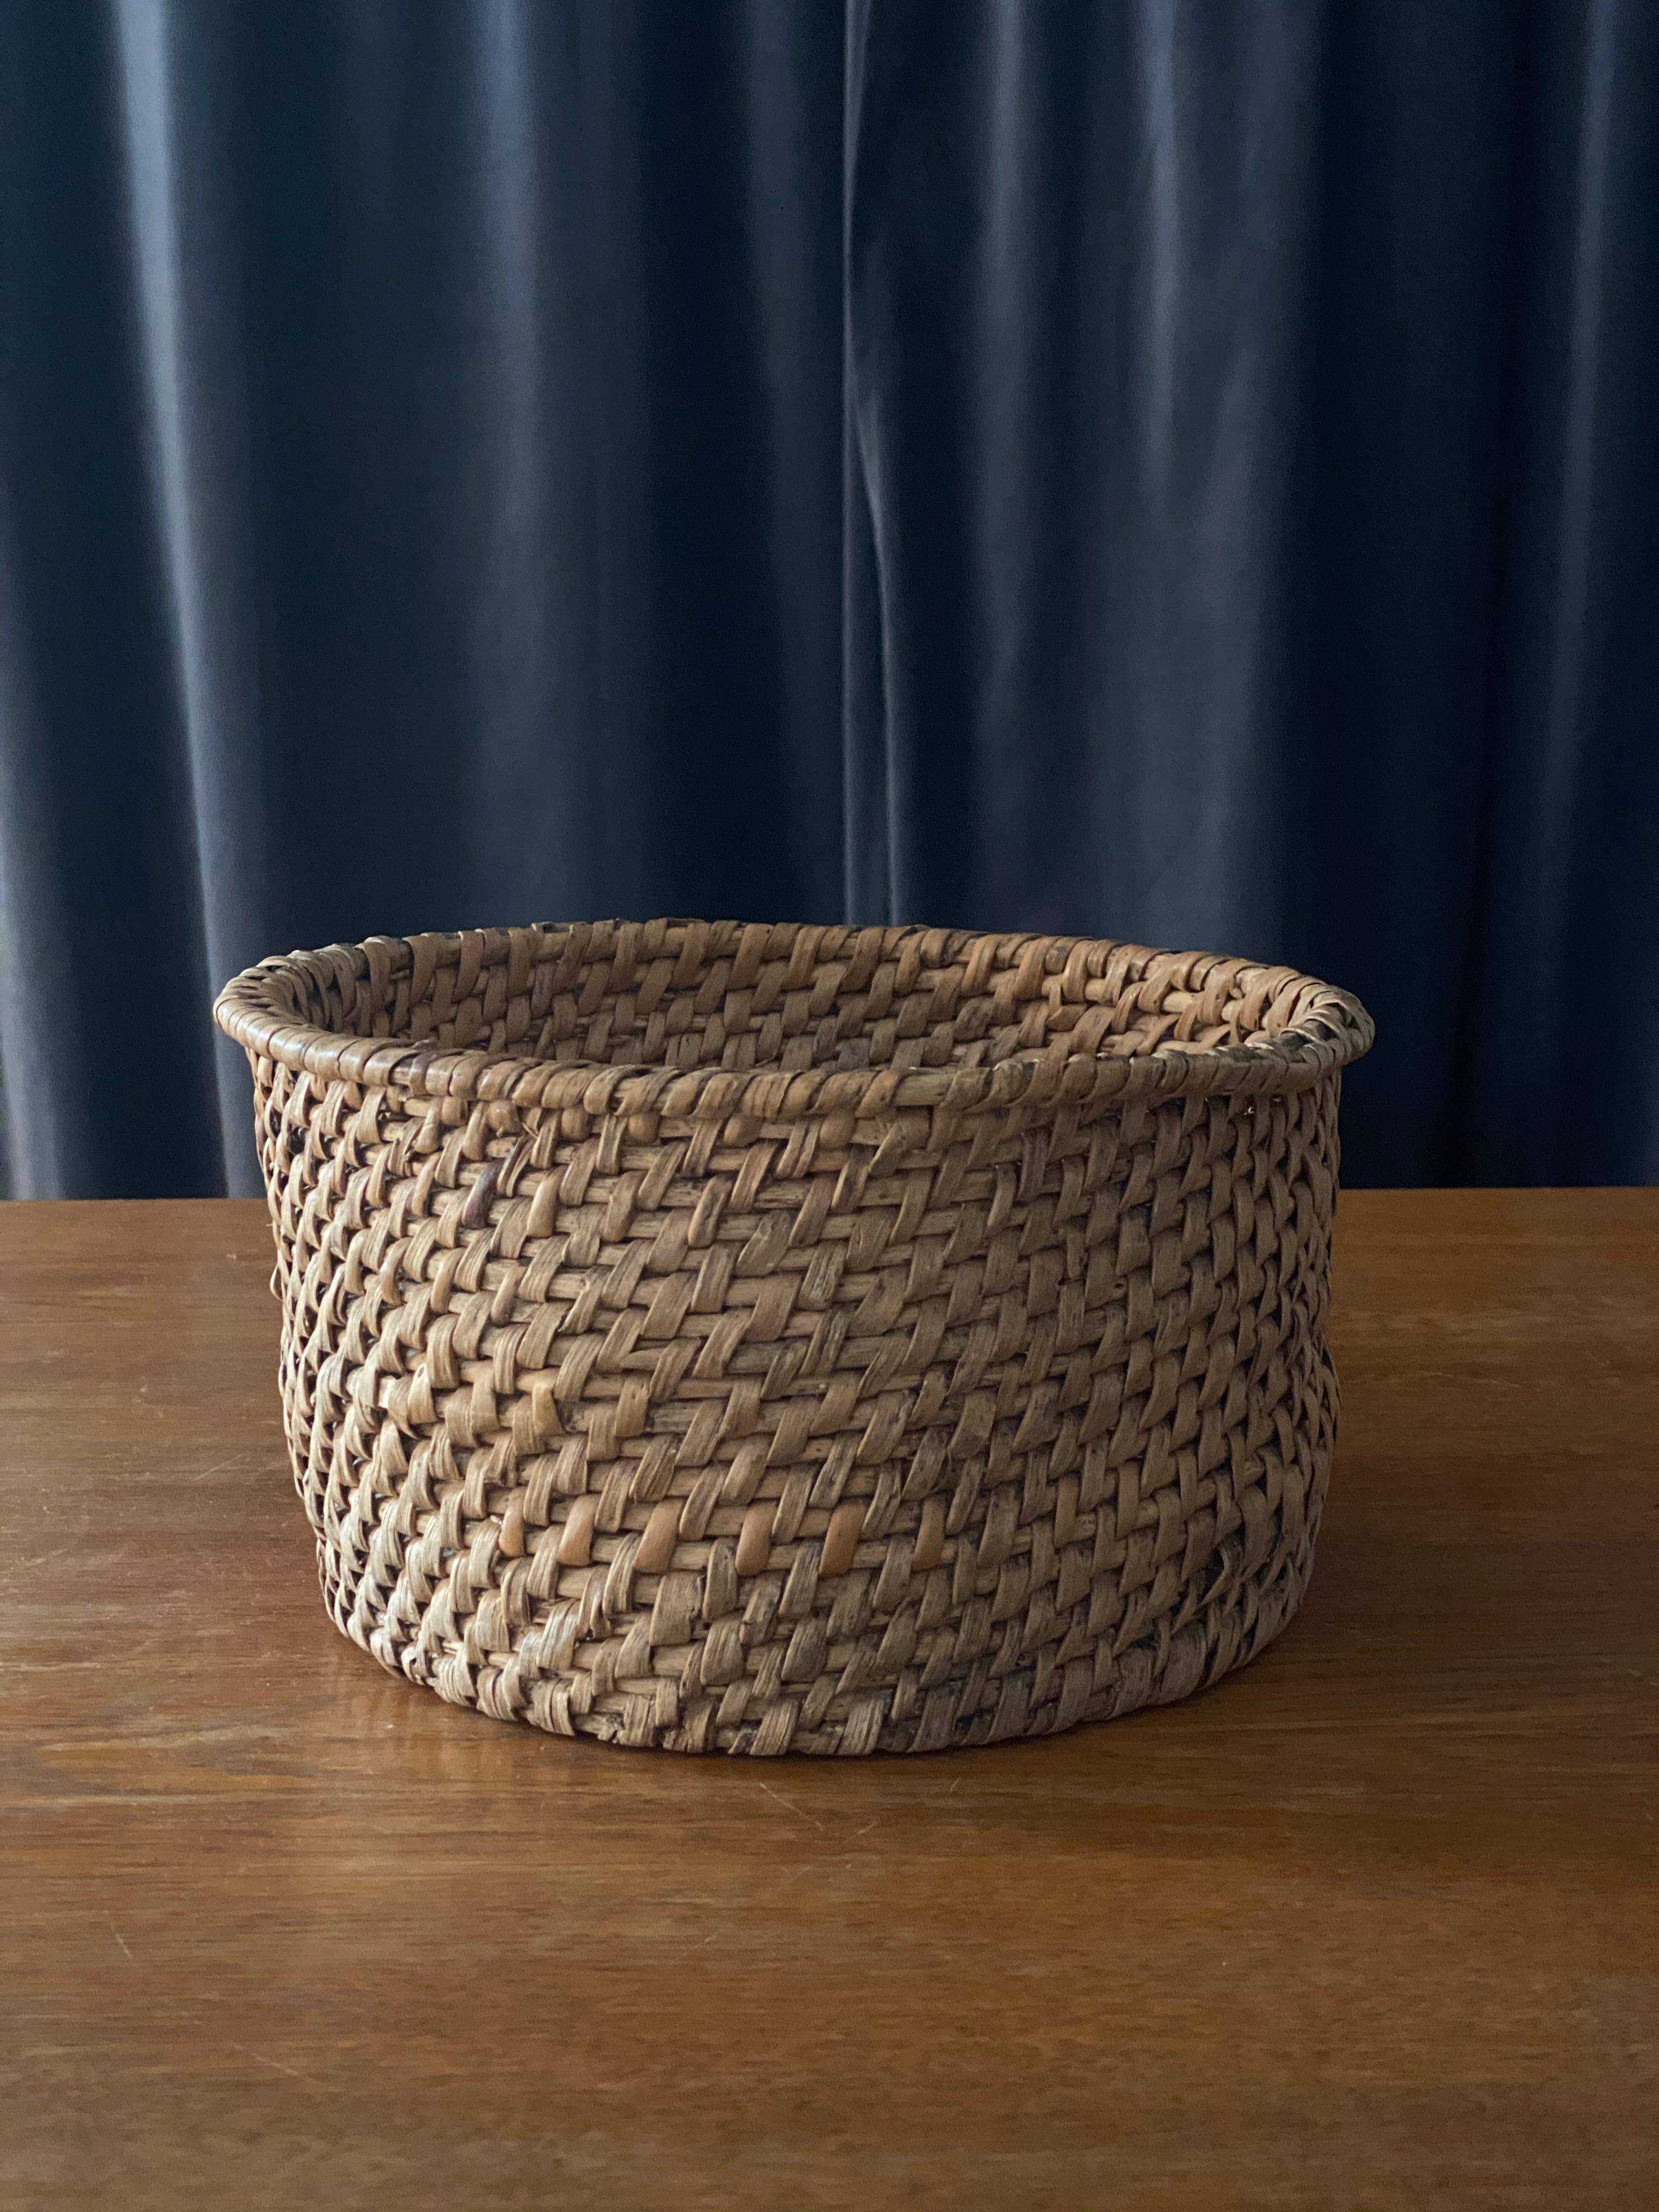 A handwoven basket or decorative bowl. Likely utilized as a form for cheese originally. Produced in Sweden, 19th century. In woven root.